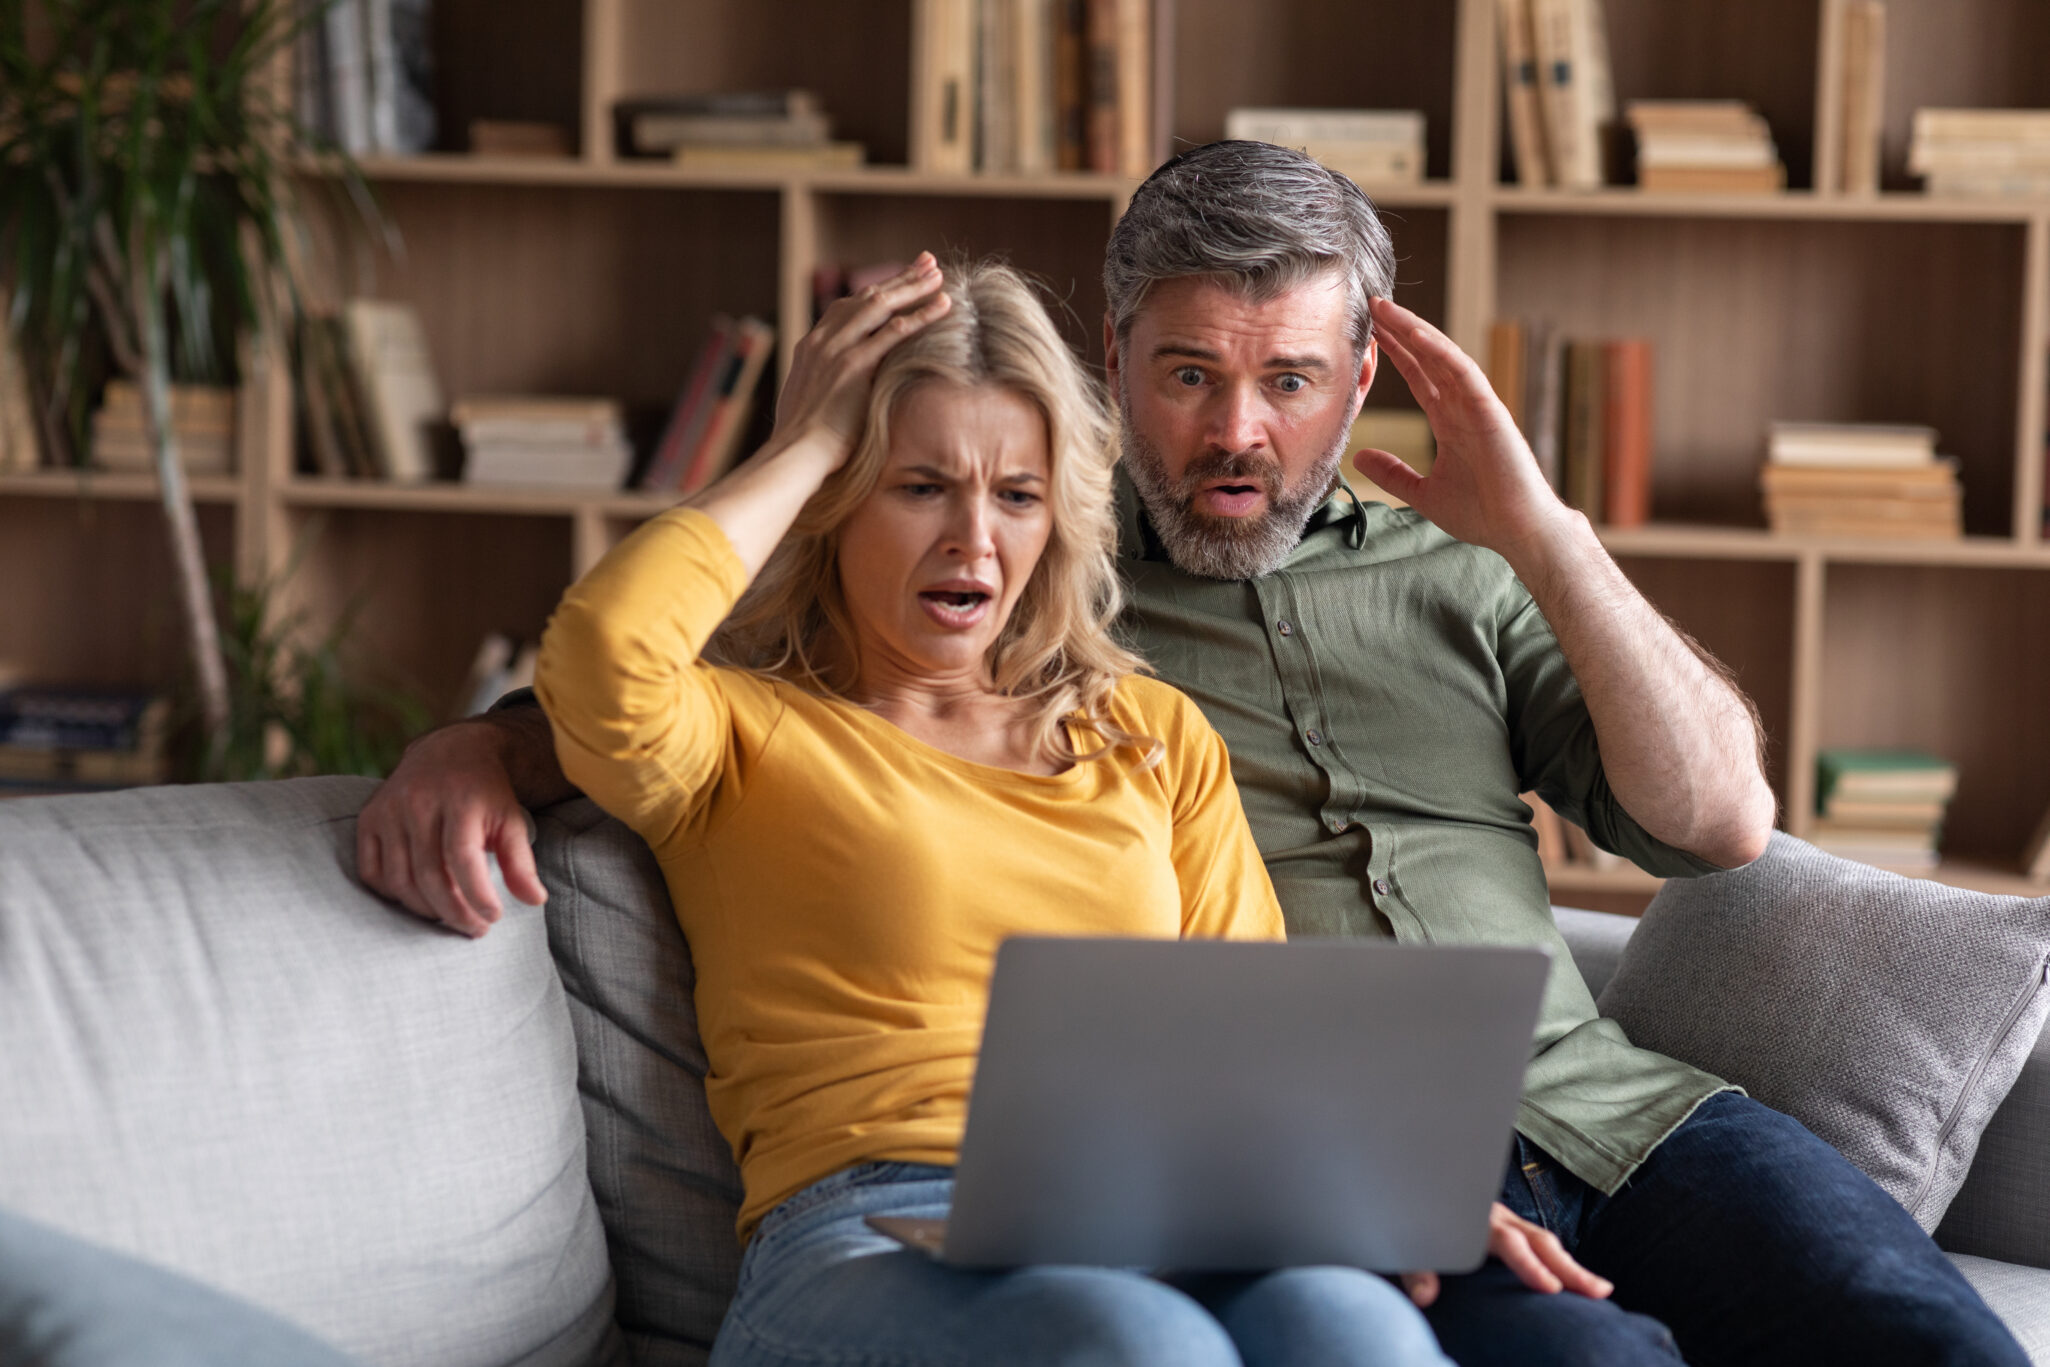 Online Scam. Emotional middle aged couple looking at laptop screen with shock, frustrated upset spouses suffering problems with computer while sitting together on couch at home, free space